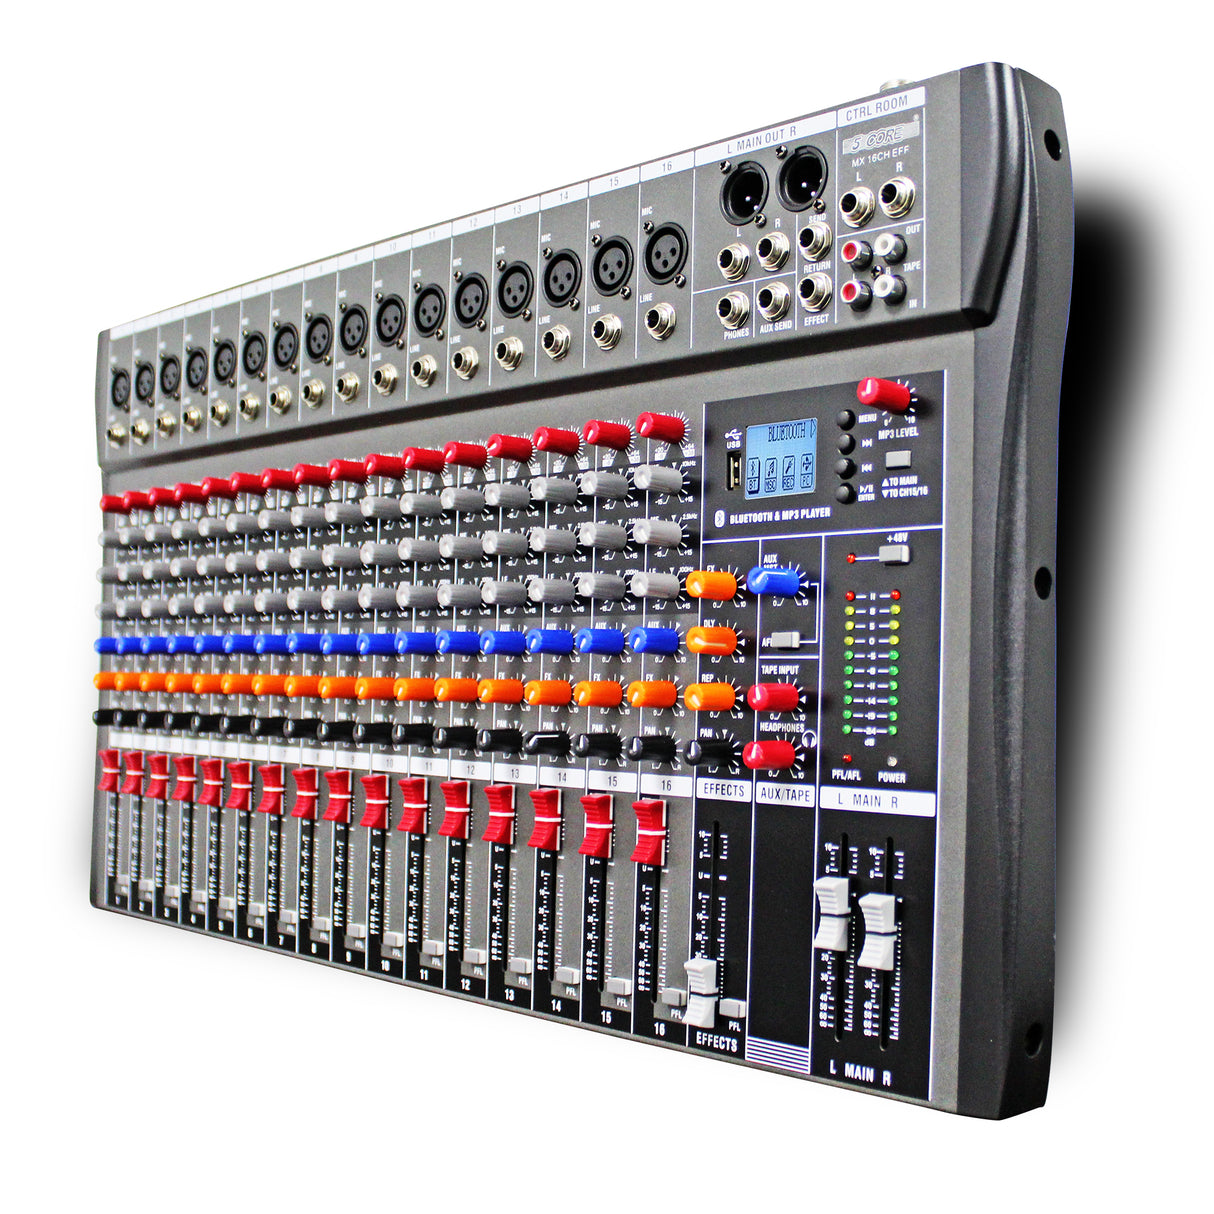 5 Core India Made 16 Channel Compact Studio Mixer with Built-In Effects & USB Interface Digital Mixer for Home Studio Recording, Podcast DJs & more MX 16CH EFF